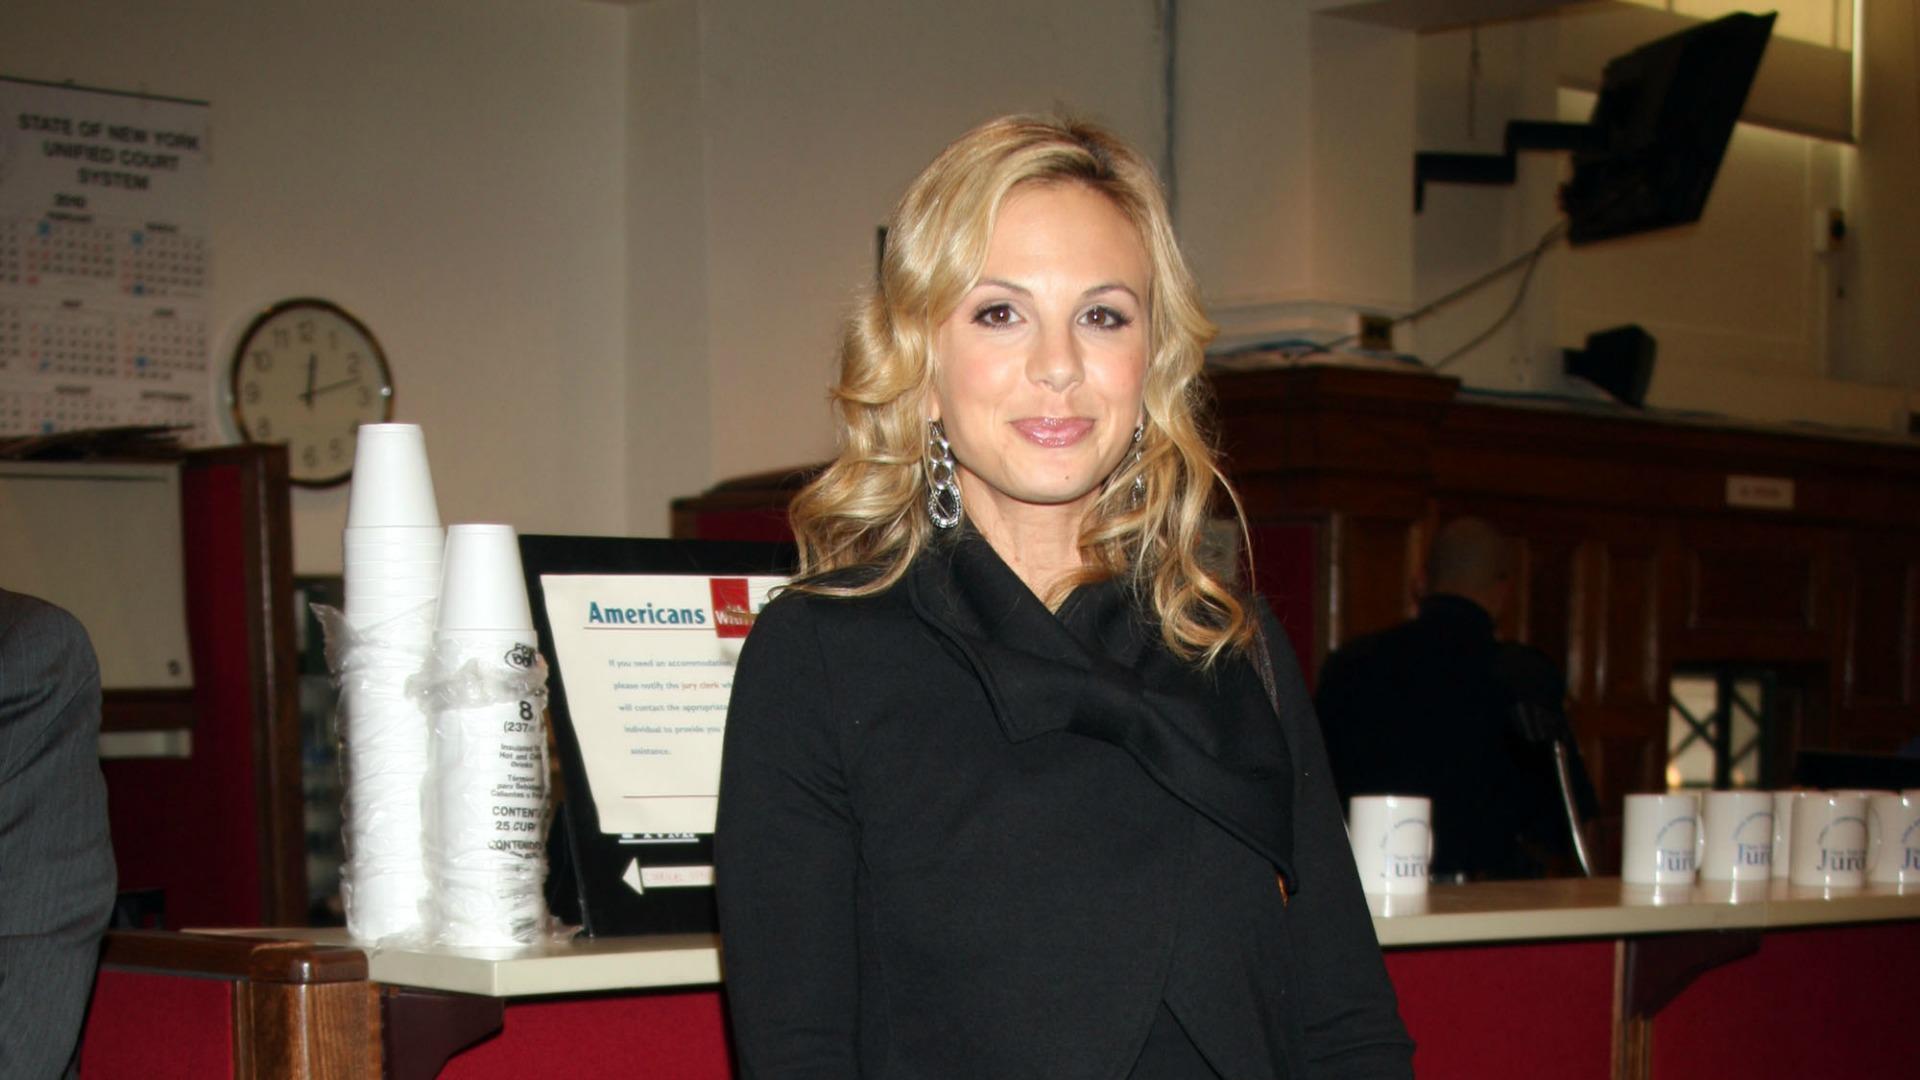 Elisabeth Hasselbeck angry about Rosie O'Donnell's return